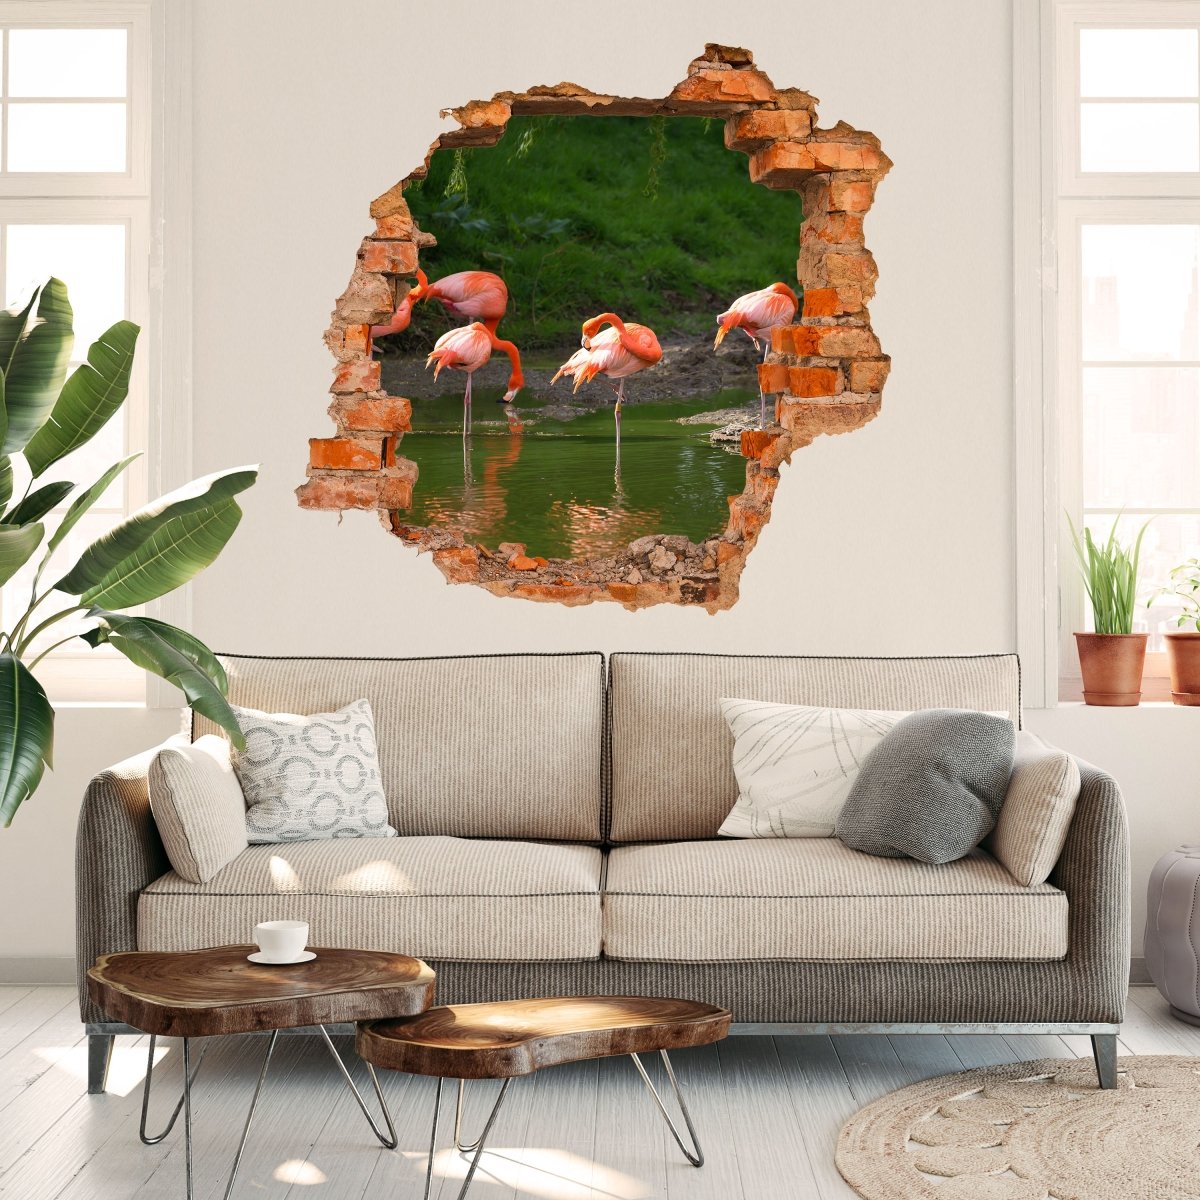 Flamingos in a pool 3D wall sticker - Wall decal M1009